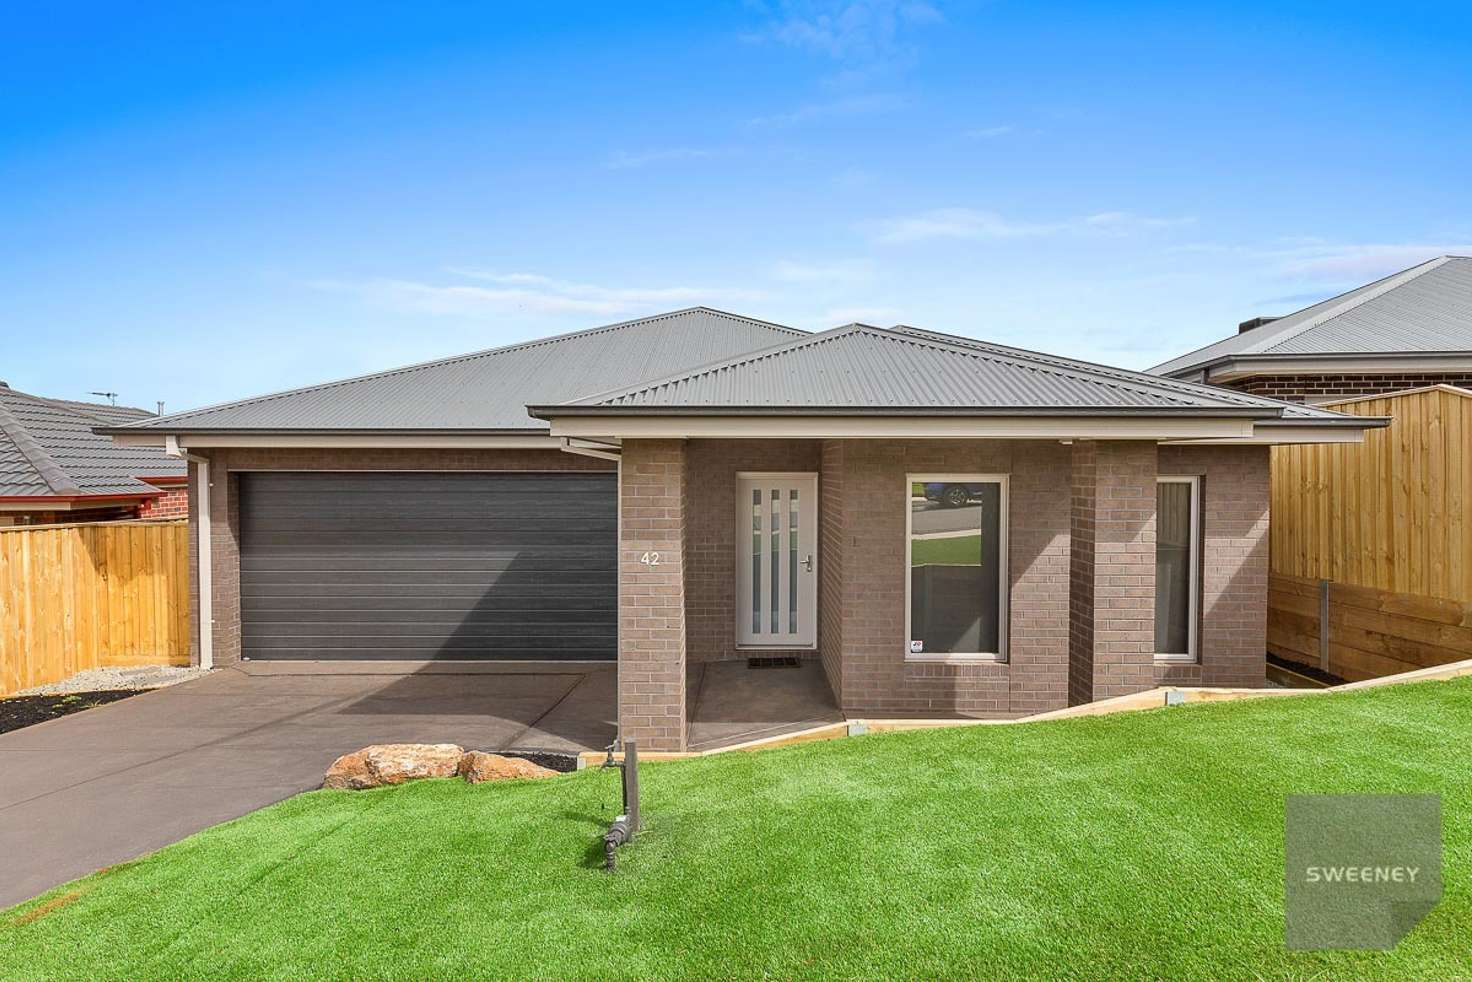 Main view of Homely house listing, 42 McLachlan Street, Bacchus Marsh VIC 3340